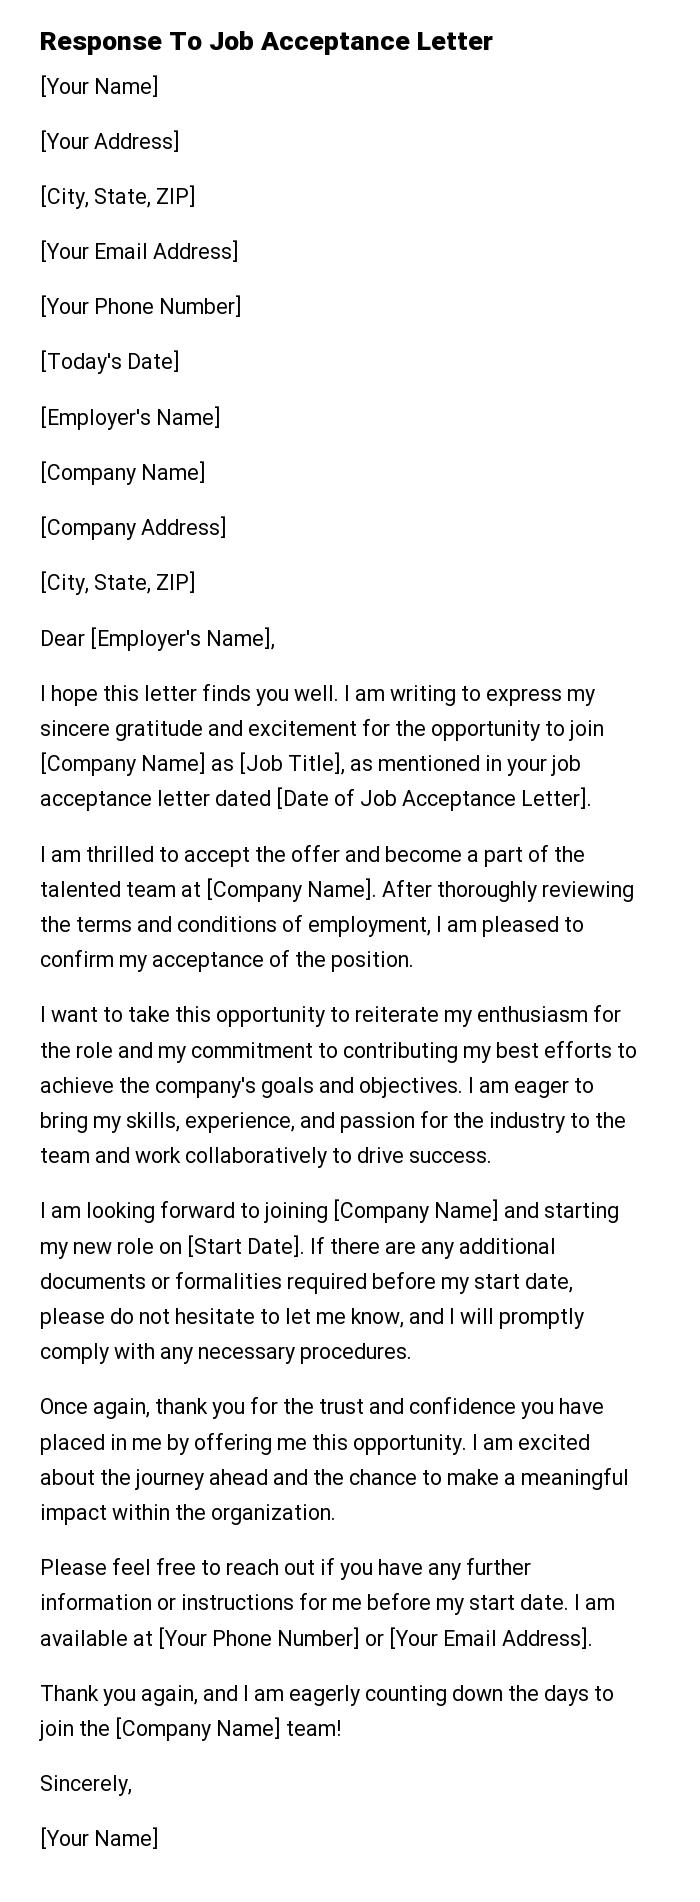 Response To Job Acceptance Letter